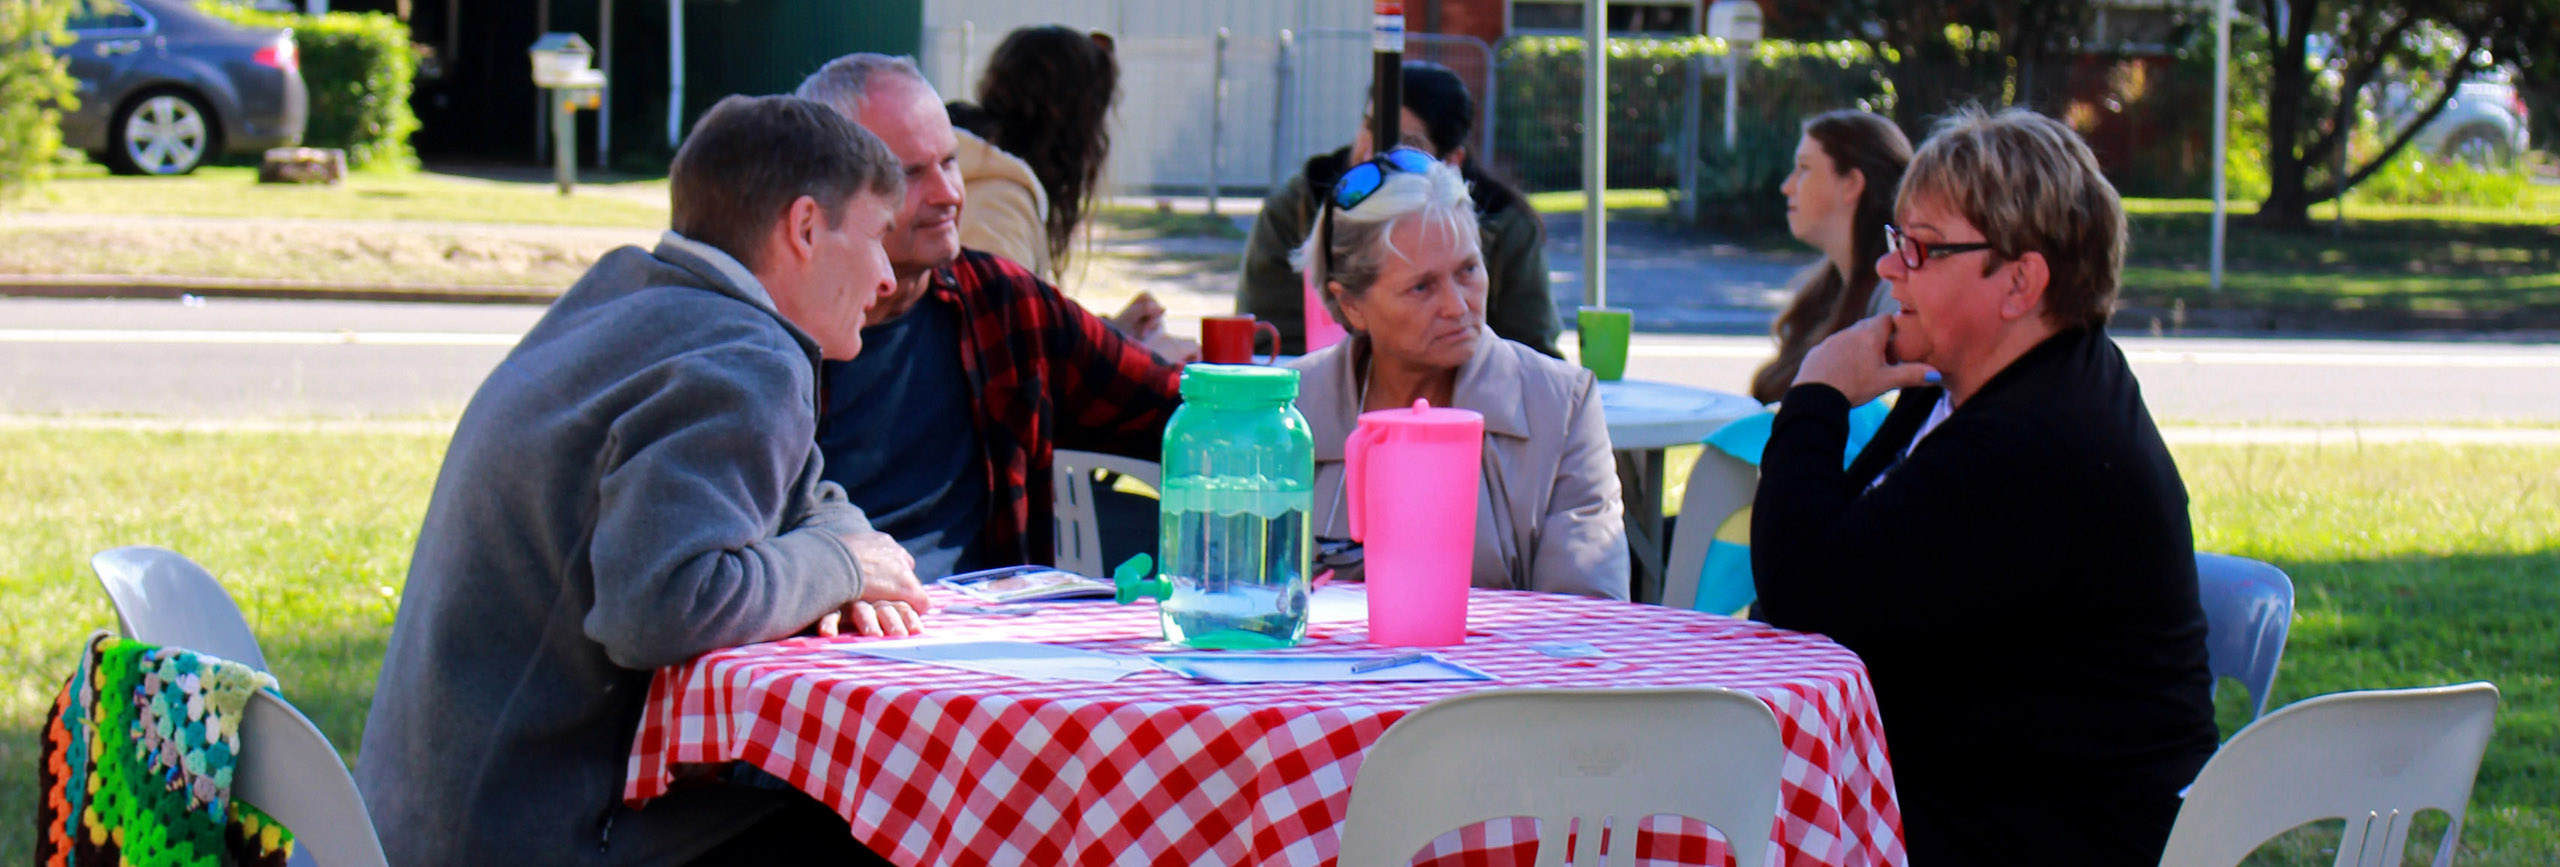 Group of people chatting at a table outdoors